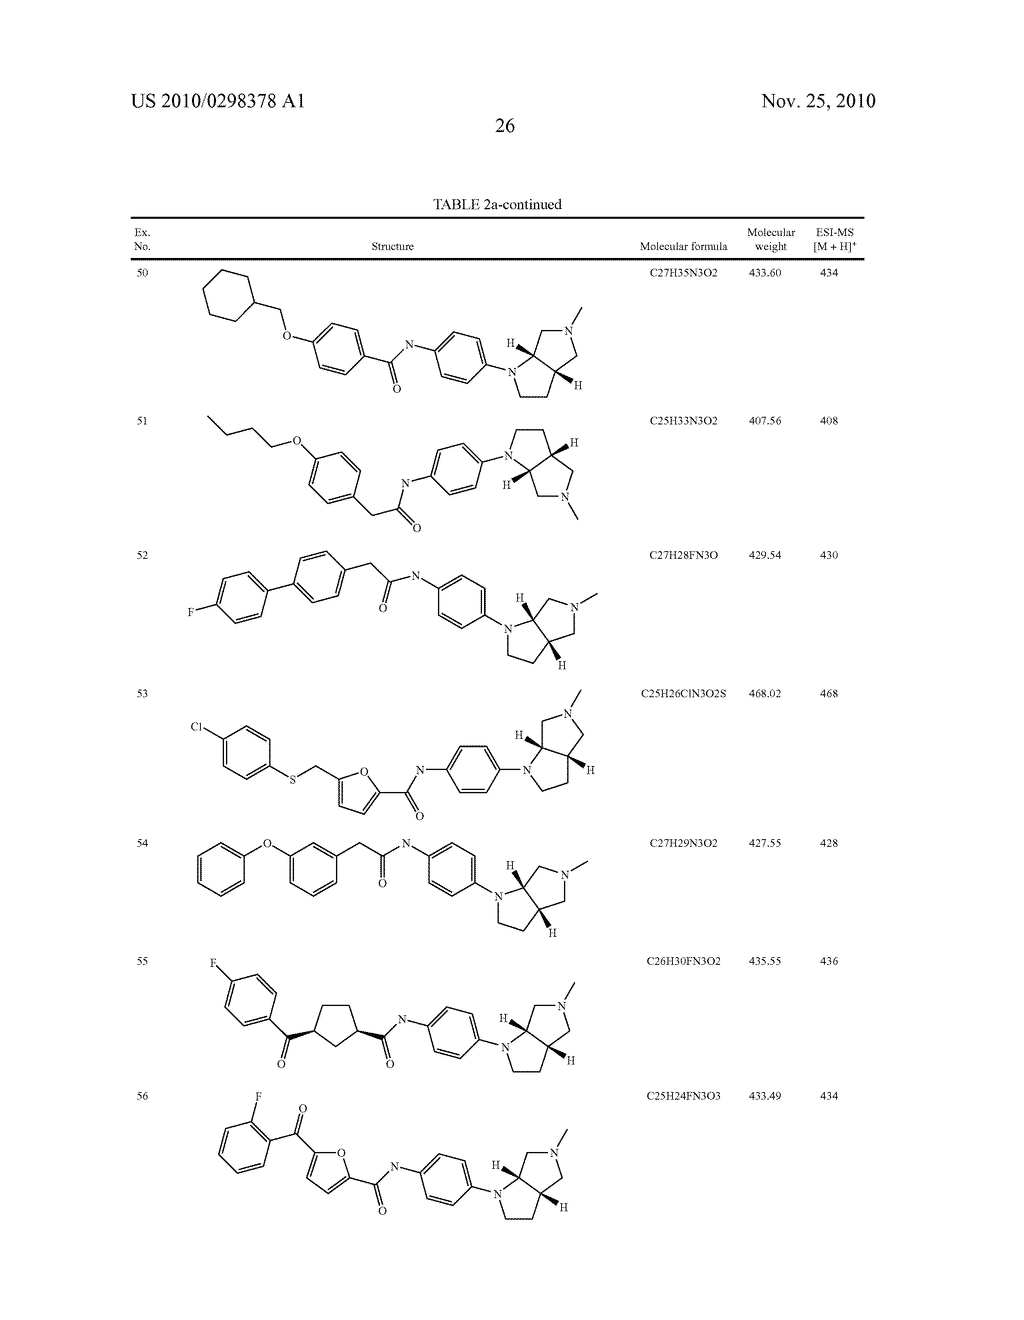 ARYL-SUBSTITUTED POLYCYCLIC AMINES, METHOD FOR THE PRODUCTION THEREOF, AND USE THEREOF AS A MEDICAMENT - diagram, schematic, and image 27